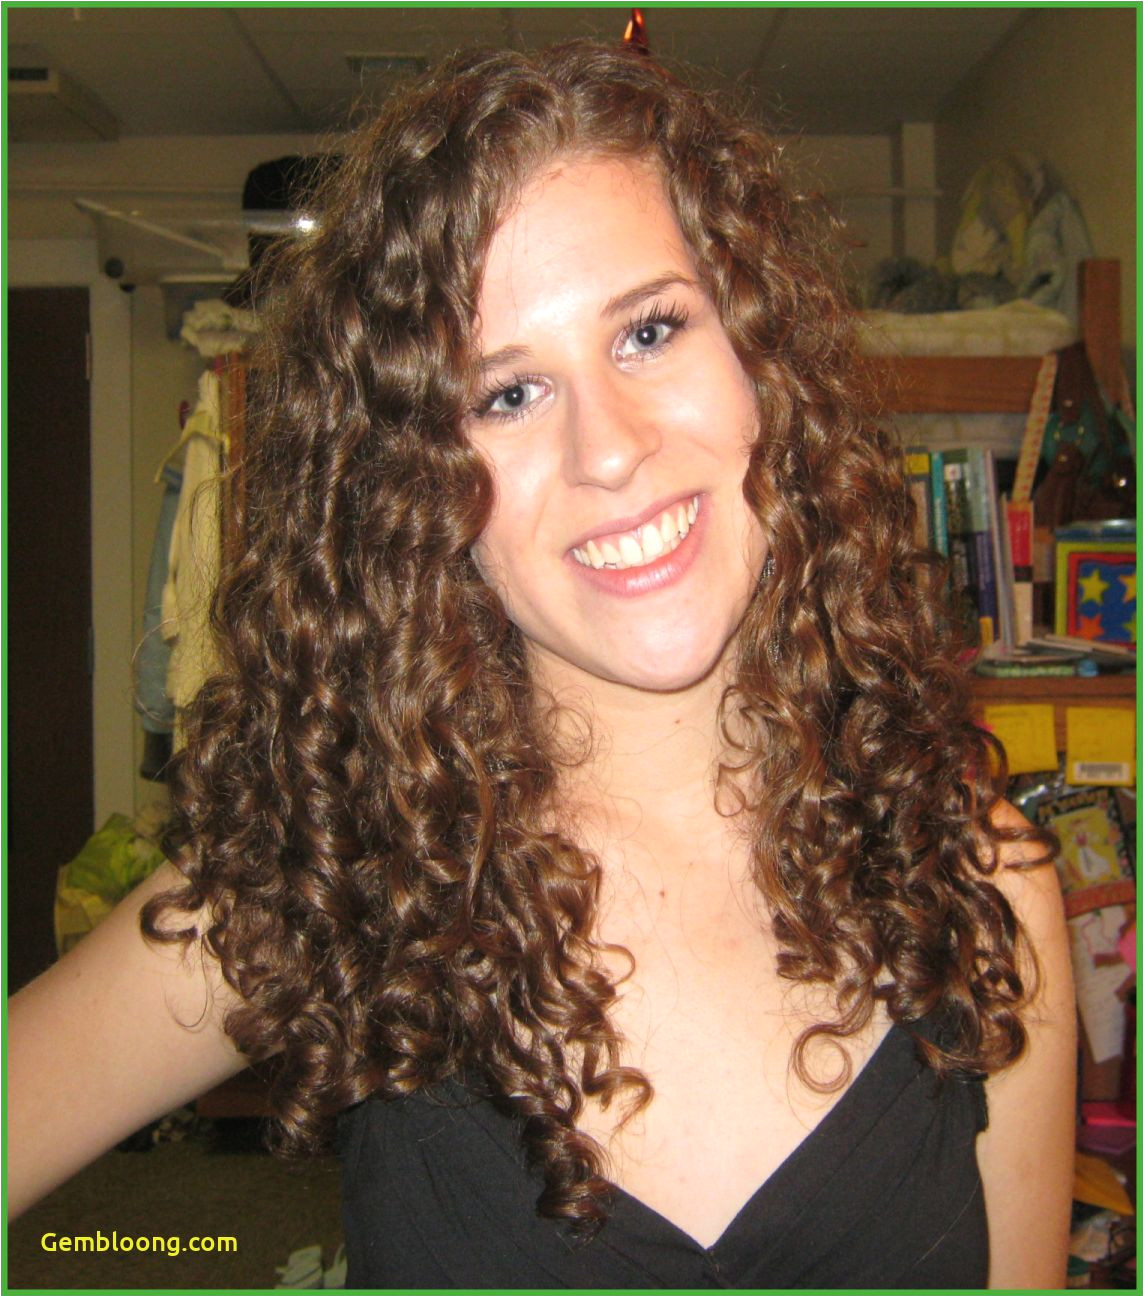 Black Curly Hairstyle Elegant Exciting Very Curly Hairstyles Fresh Curly Hair 0d Archives Hair